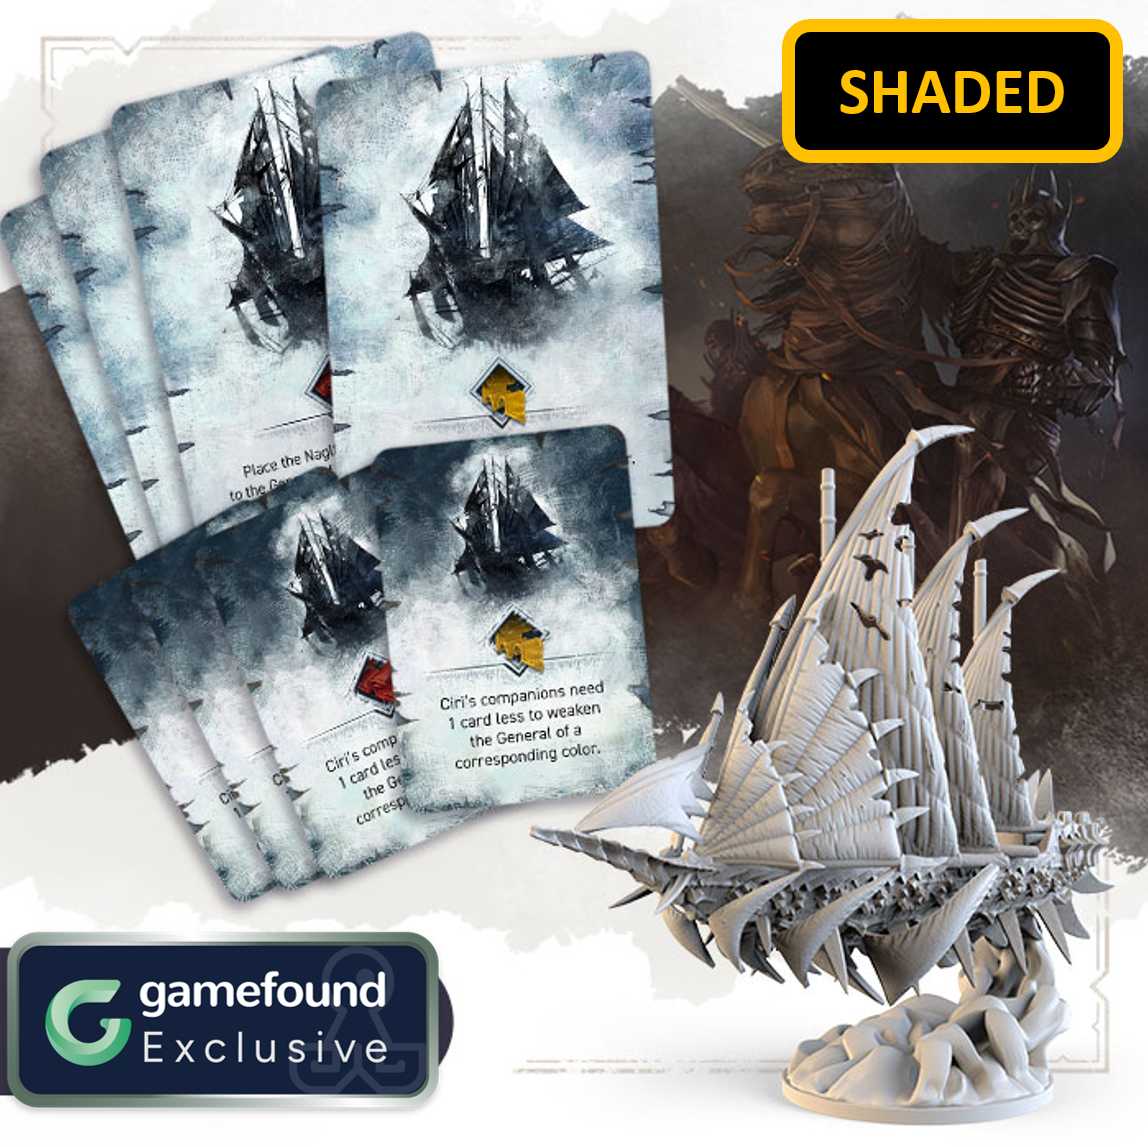 Gamefound Exclusive The Witcher: Path of Destiny Board Game Naglfar Expansion, Shaded Edition